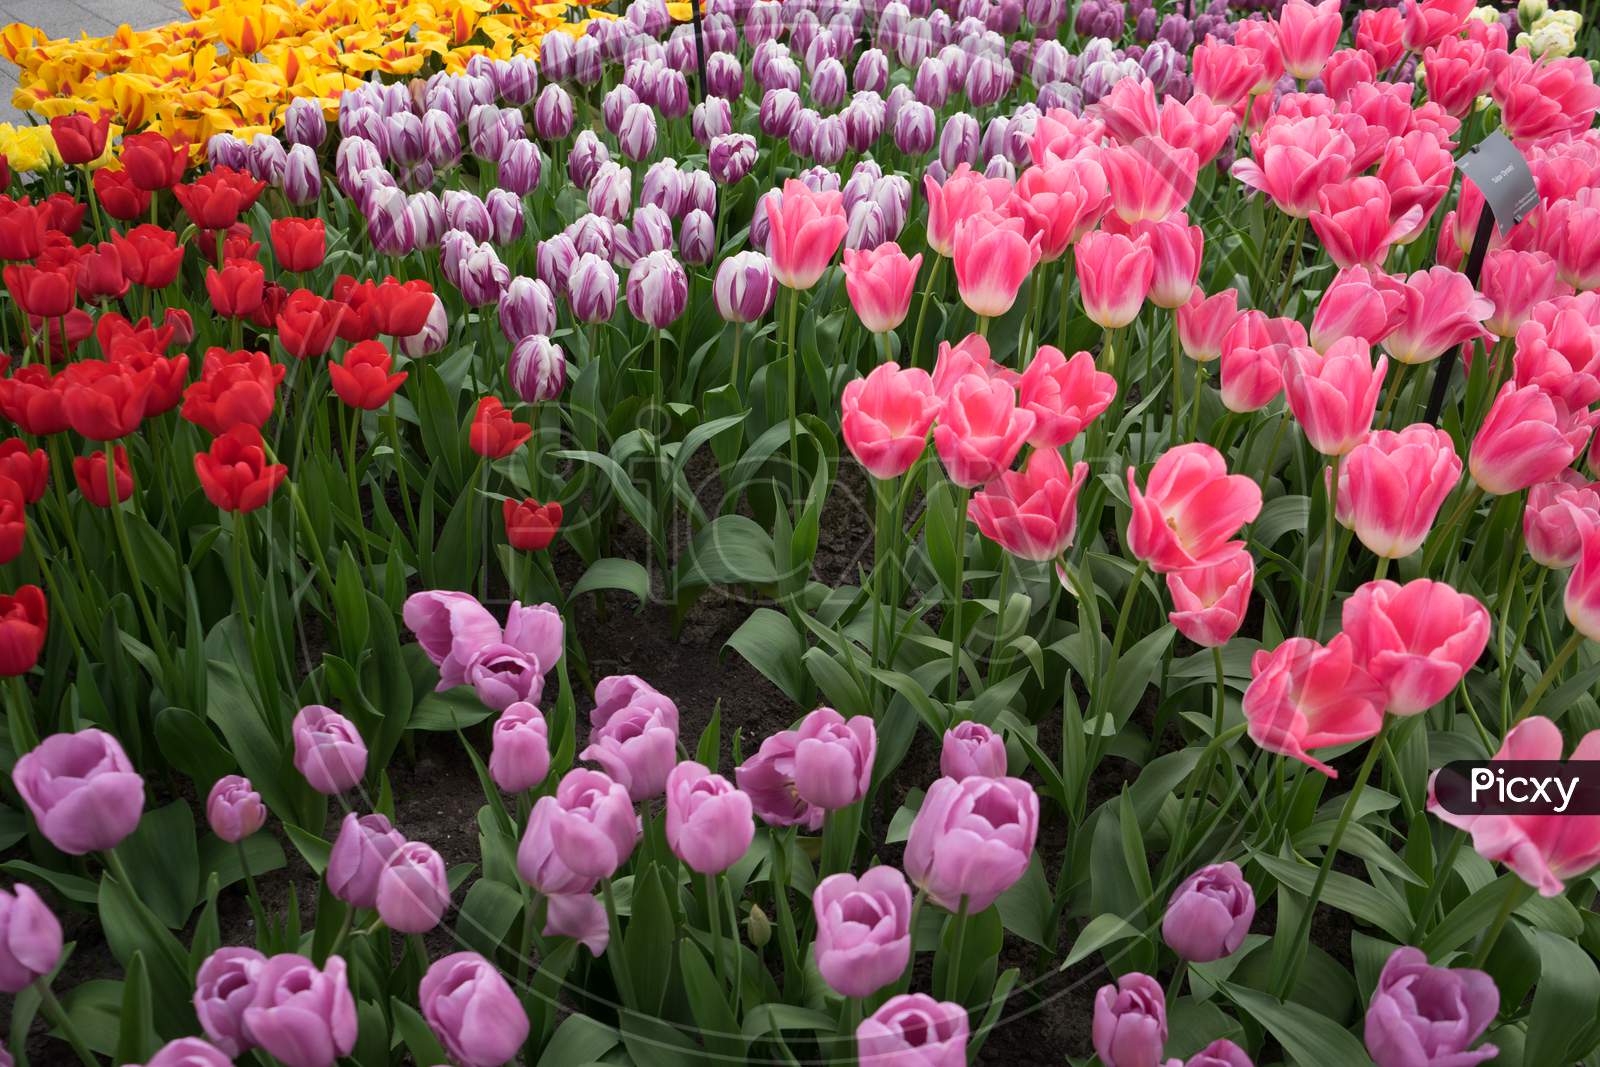 Rose, Pink, Red And Yellow Colored Tulips In A Garden At Lisse, Netherlands, Europe